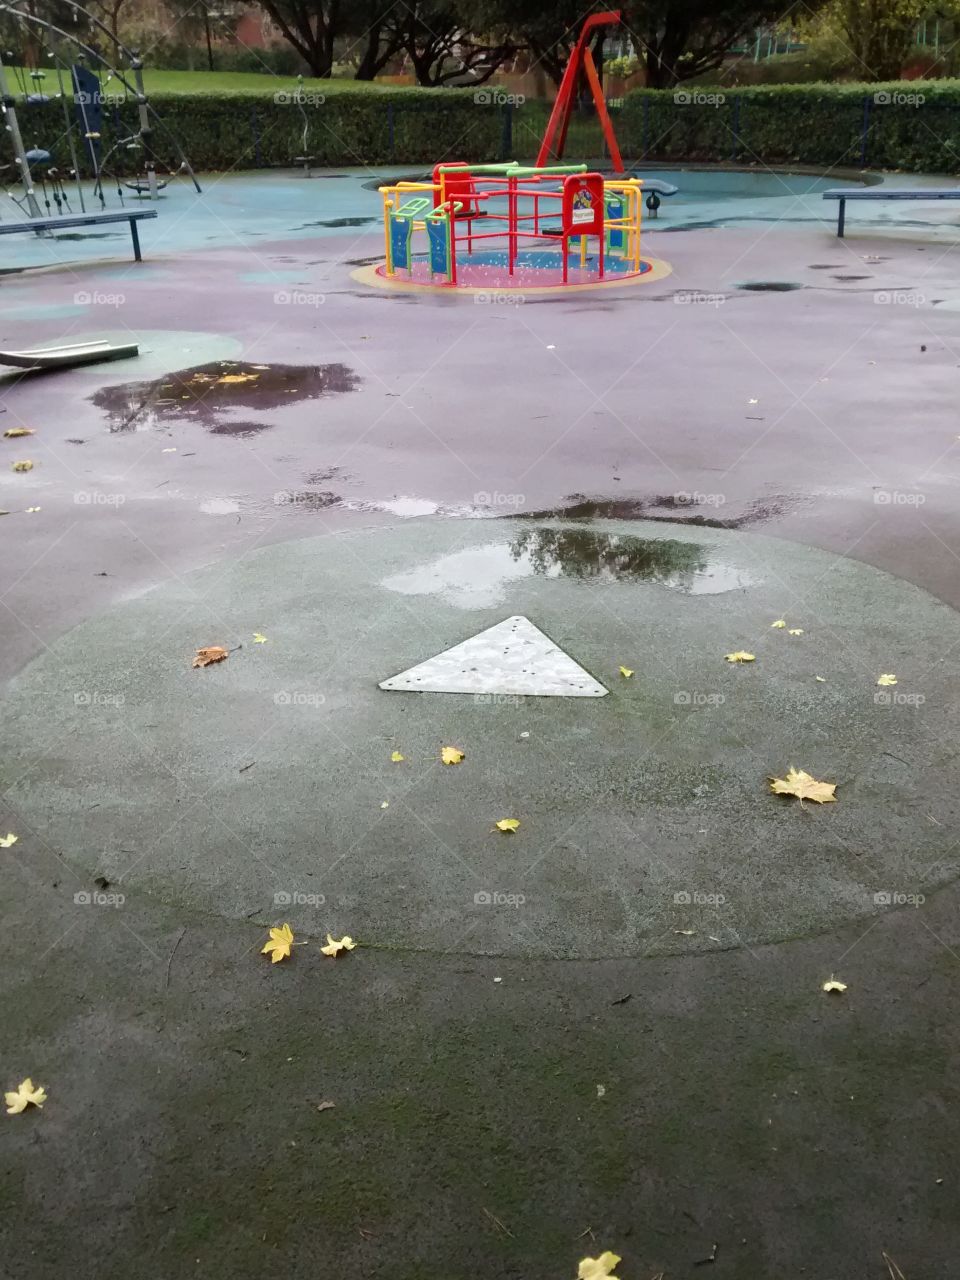 The play button doesn't work in the rain